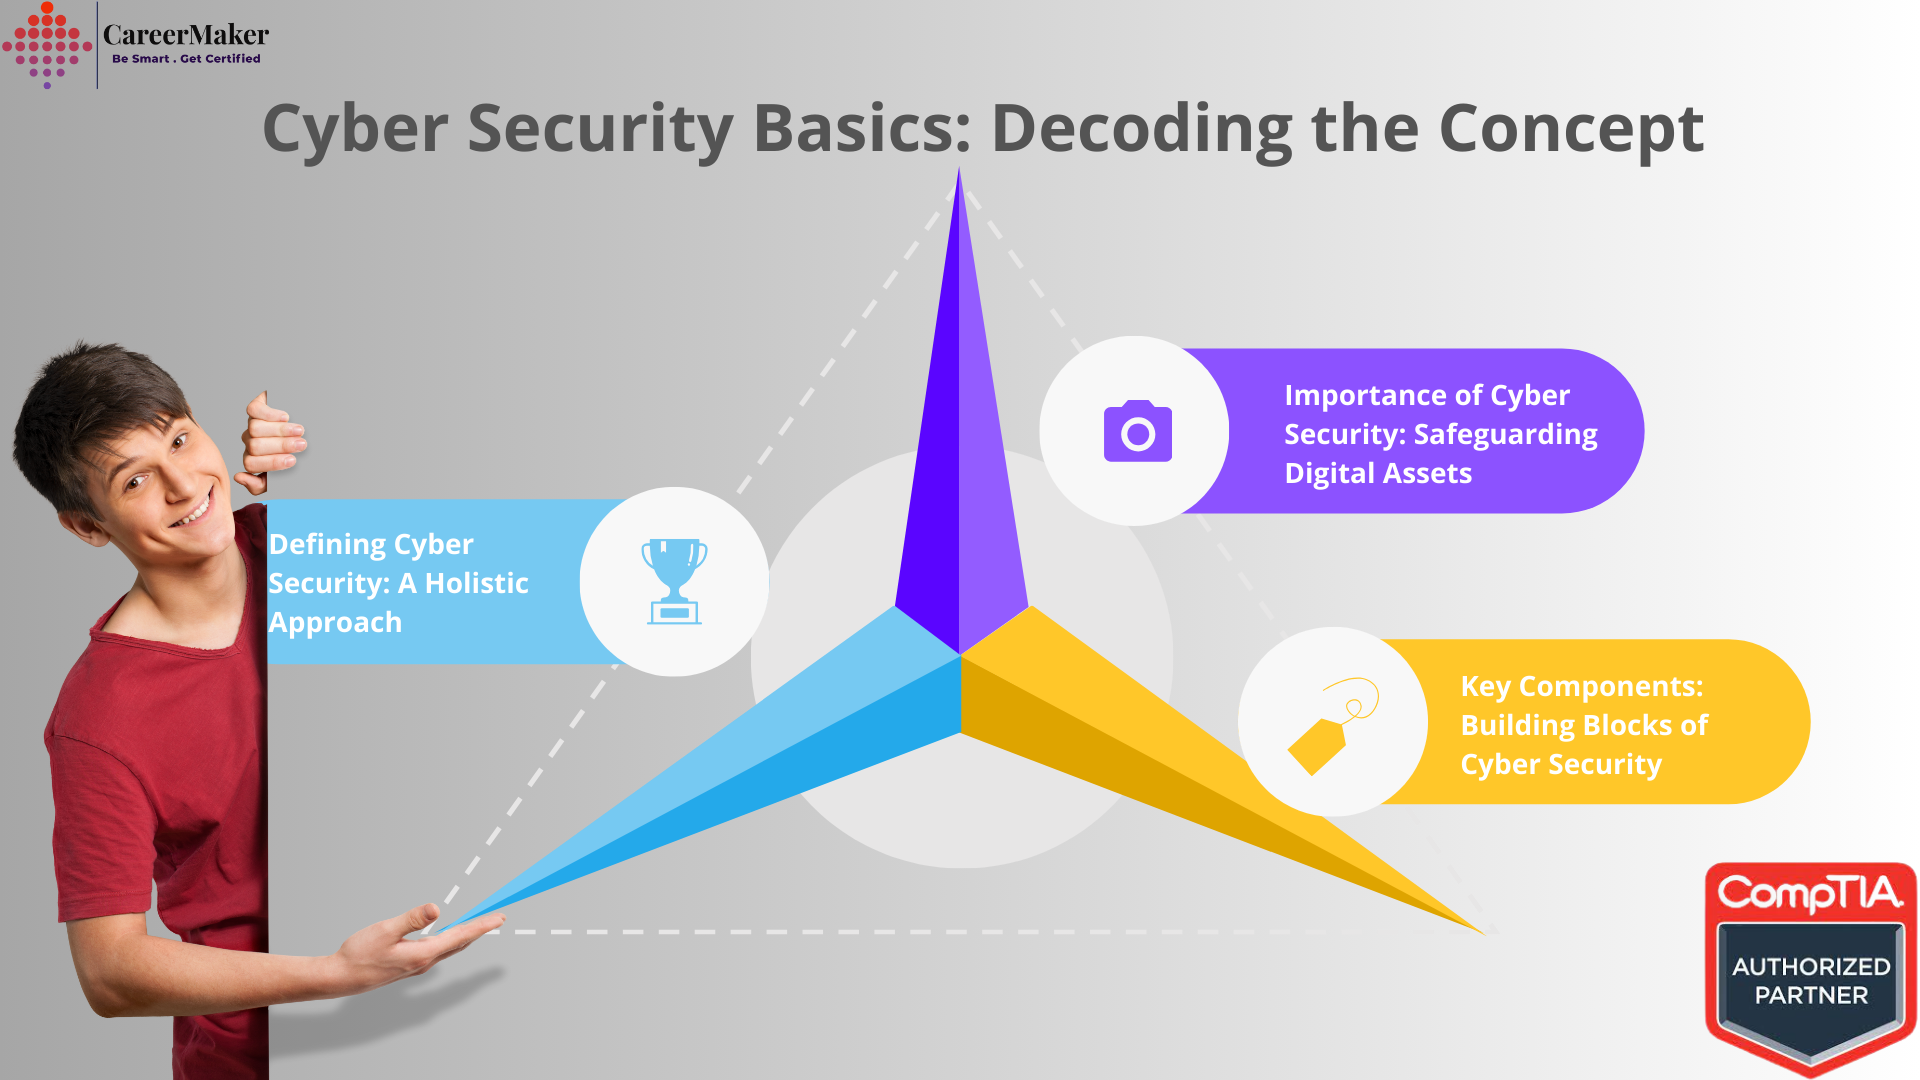 Cyber Security Basics: Decoding the Concept